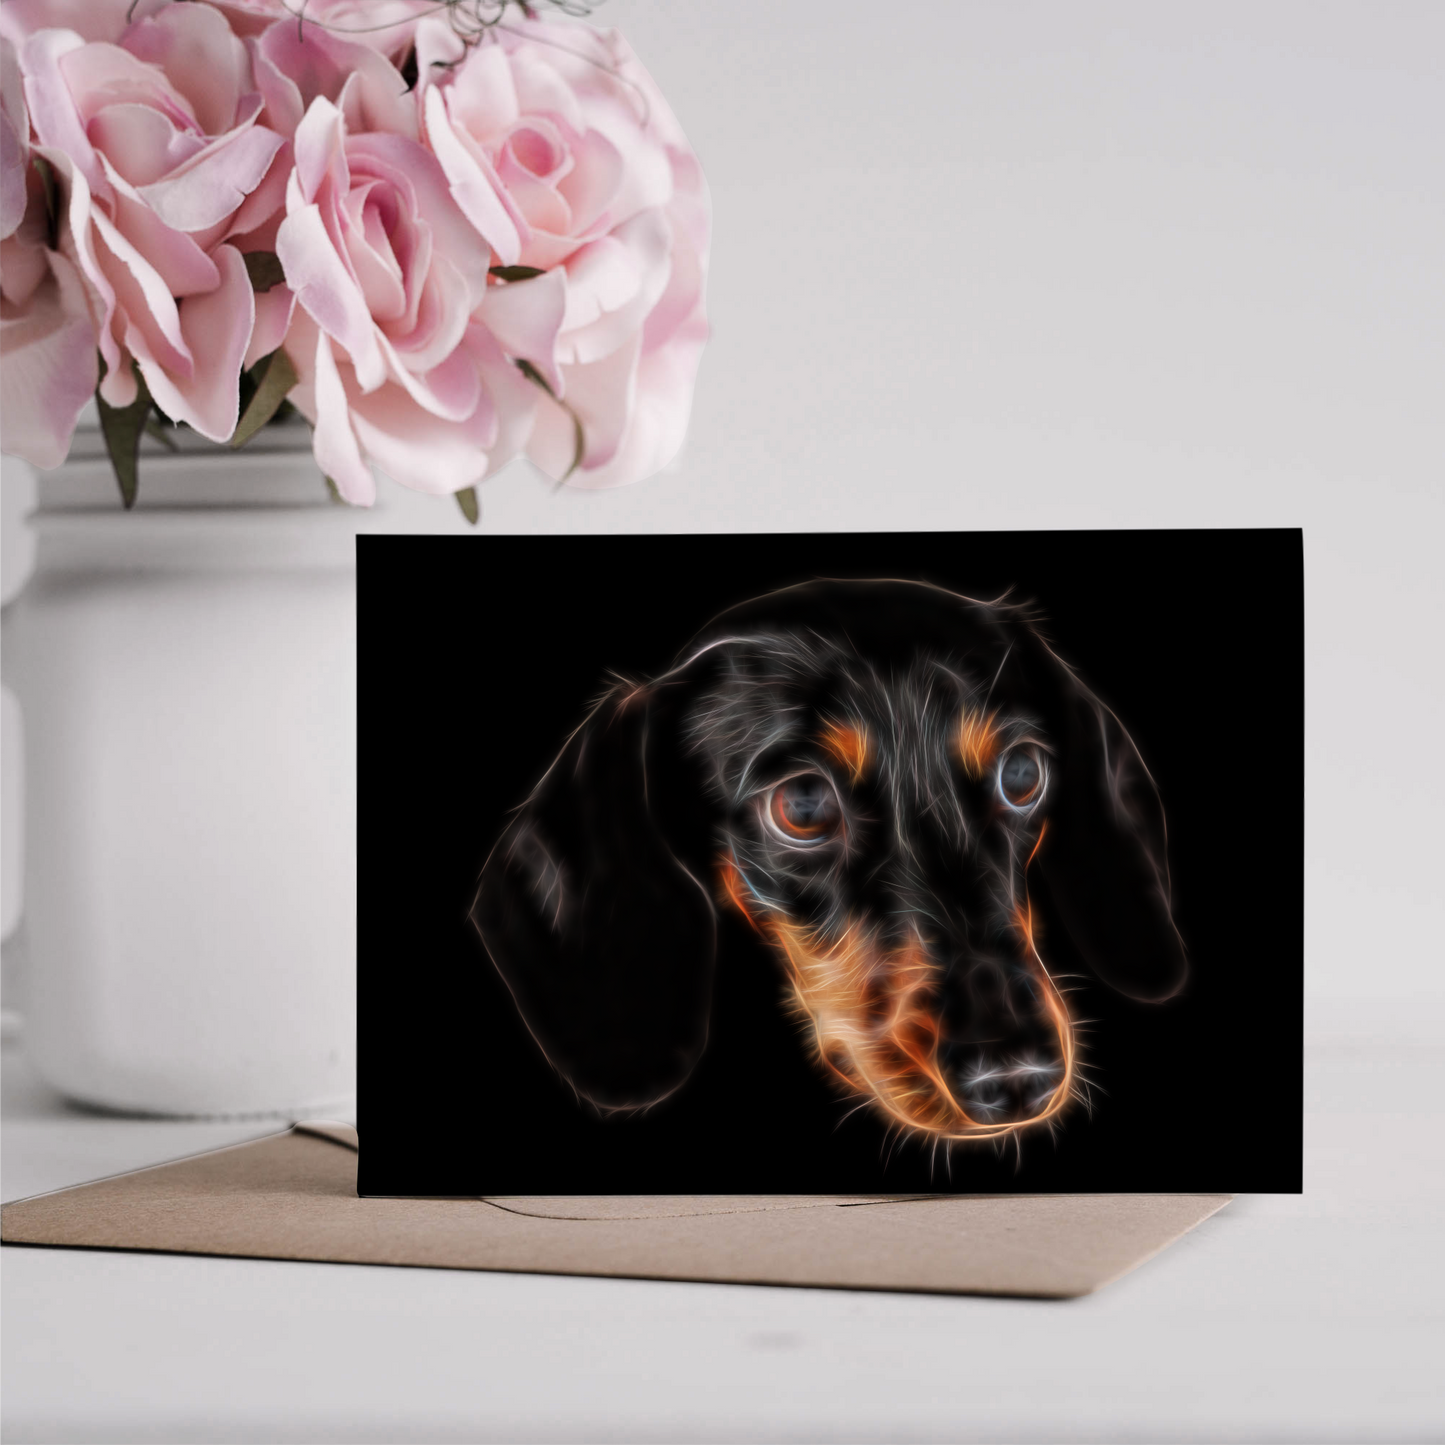 Black and Tan Dachshund Greeting Card Blank Inside for Birthdays or any other Occasion